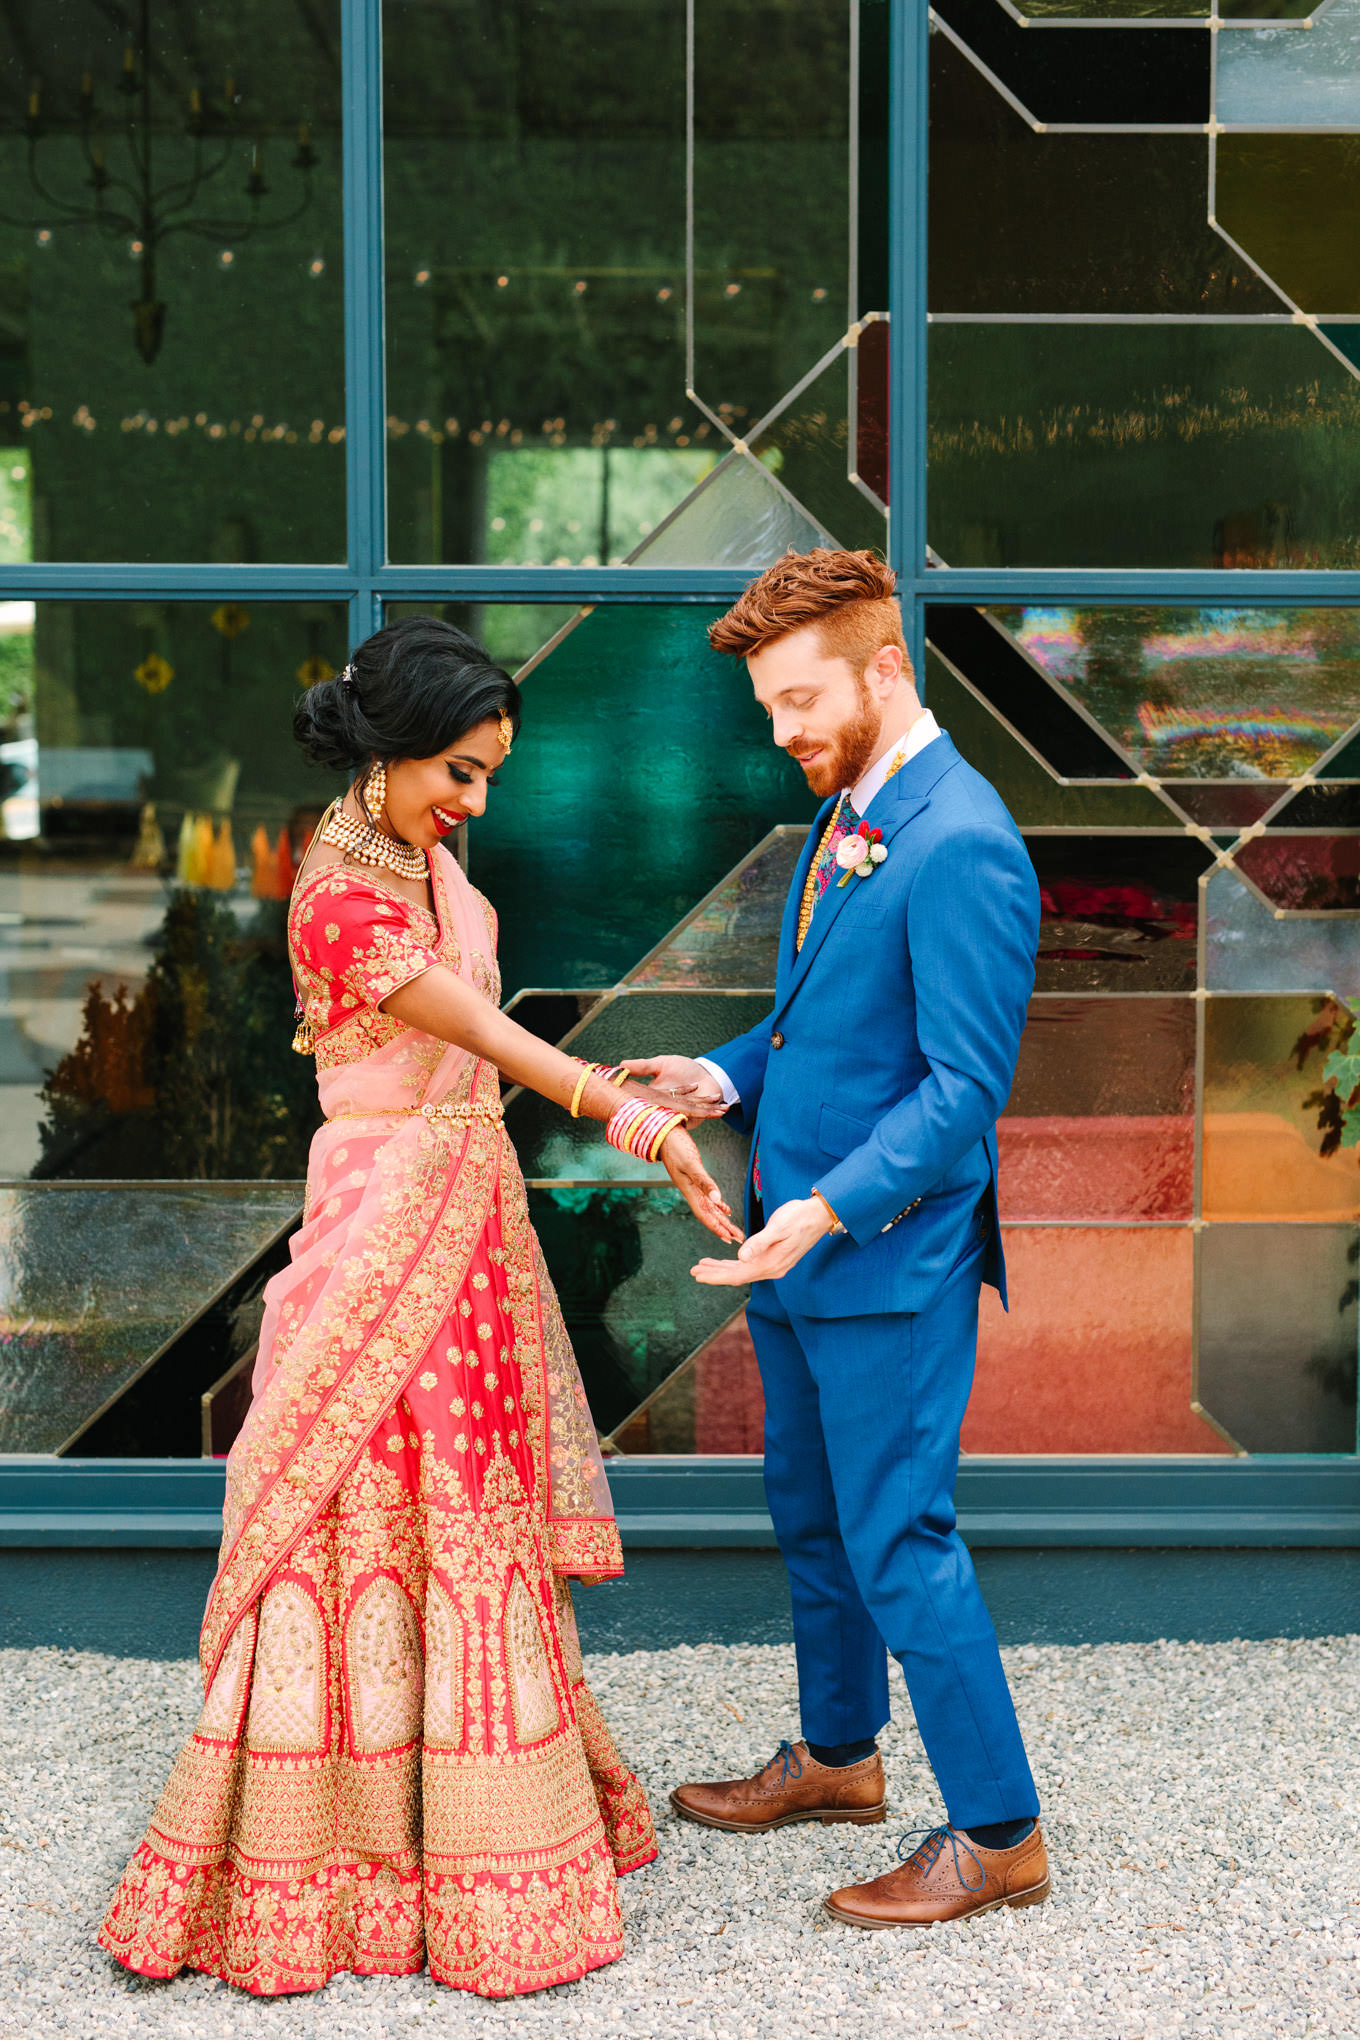 Bride showing henna tattoo during first look. Two Disney artists create a unique and colorful Indian Fusion wedding at The Fig House Los Angeles, featured on Green Wedding Shoes. | Colorful and elevated wedding inspiration for fun-loving couples in Southern California | #indianwedding #indianfusionwedding #thefighouse #losangeleswedding   Source: Mary Costa Photography | Los Angeles